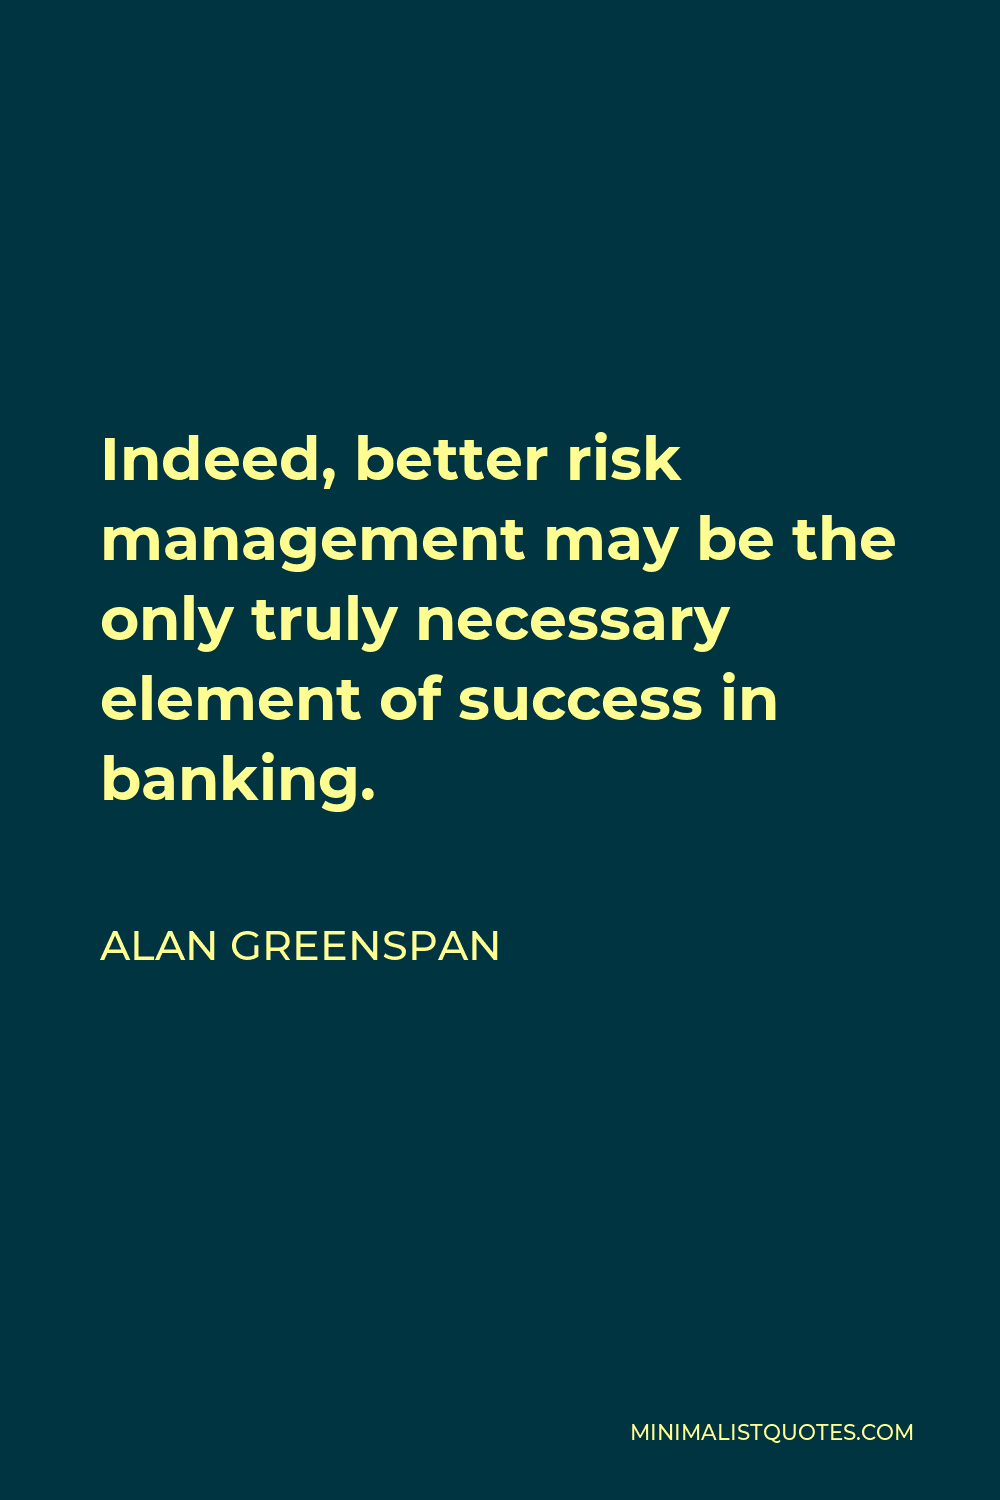 Alan Greenspan Quote - Indeed, better risk management may be the only truly necessary element of success in banking.